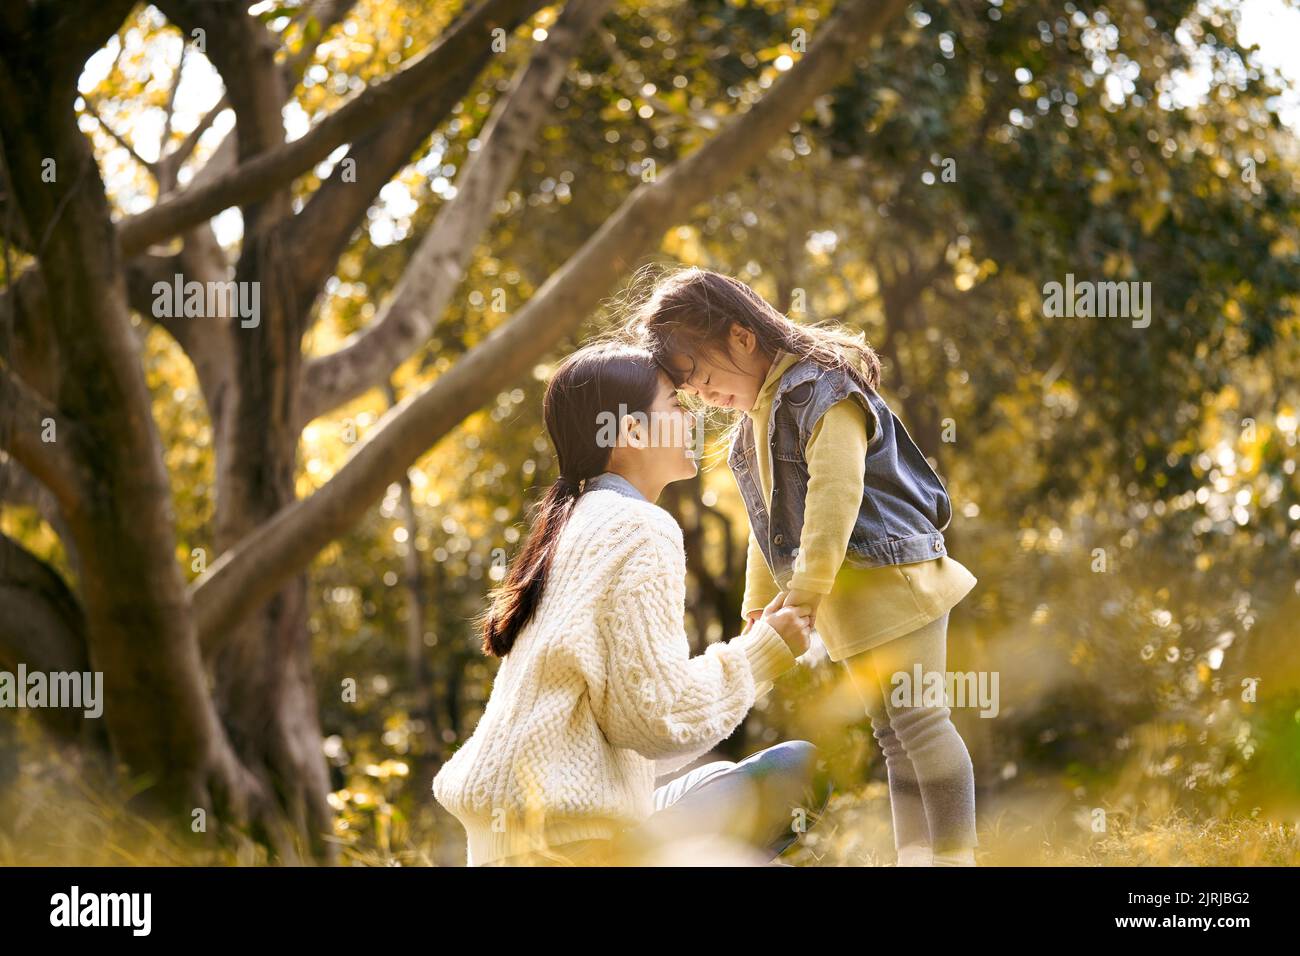 young asian mother and preschool daughter enjoying nature having a good time outdoors in park Stock Photo